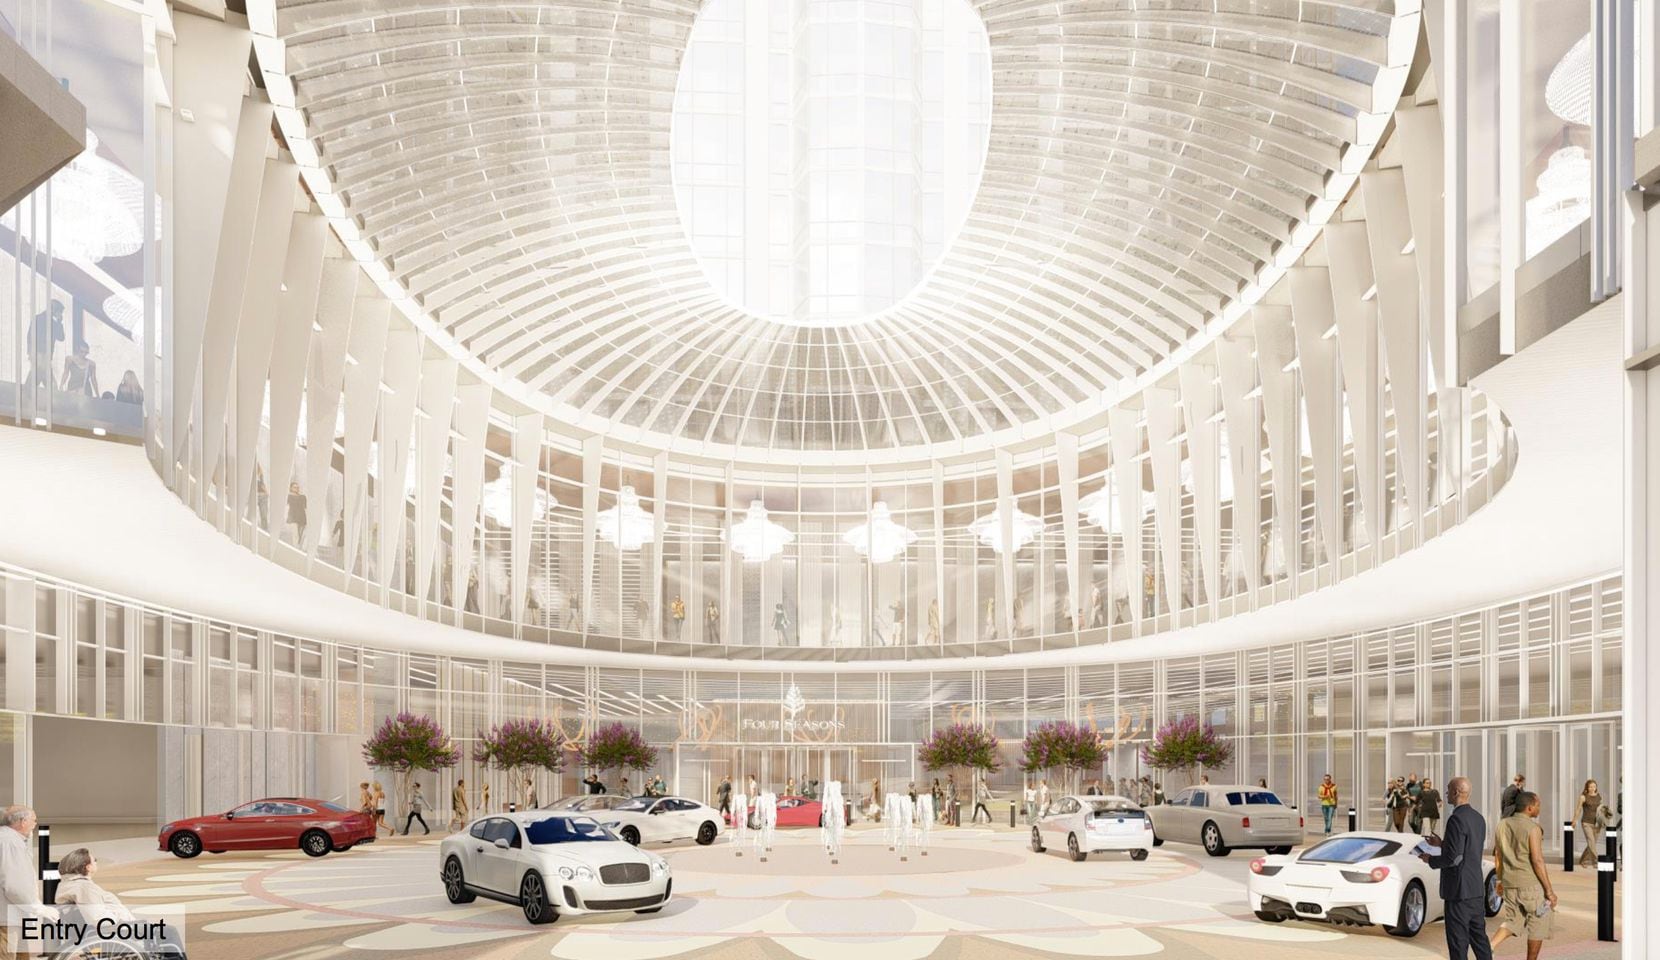 Plans for the Four Seasons tower include an elaborate circular entryway.